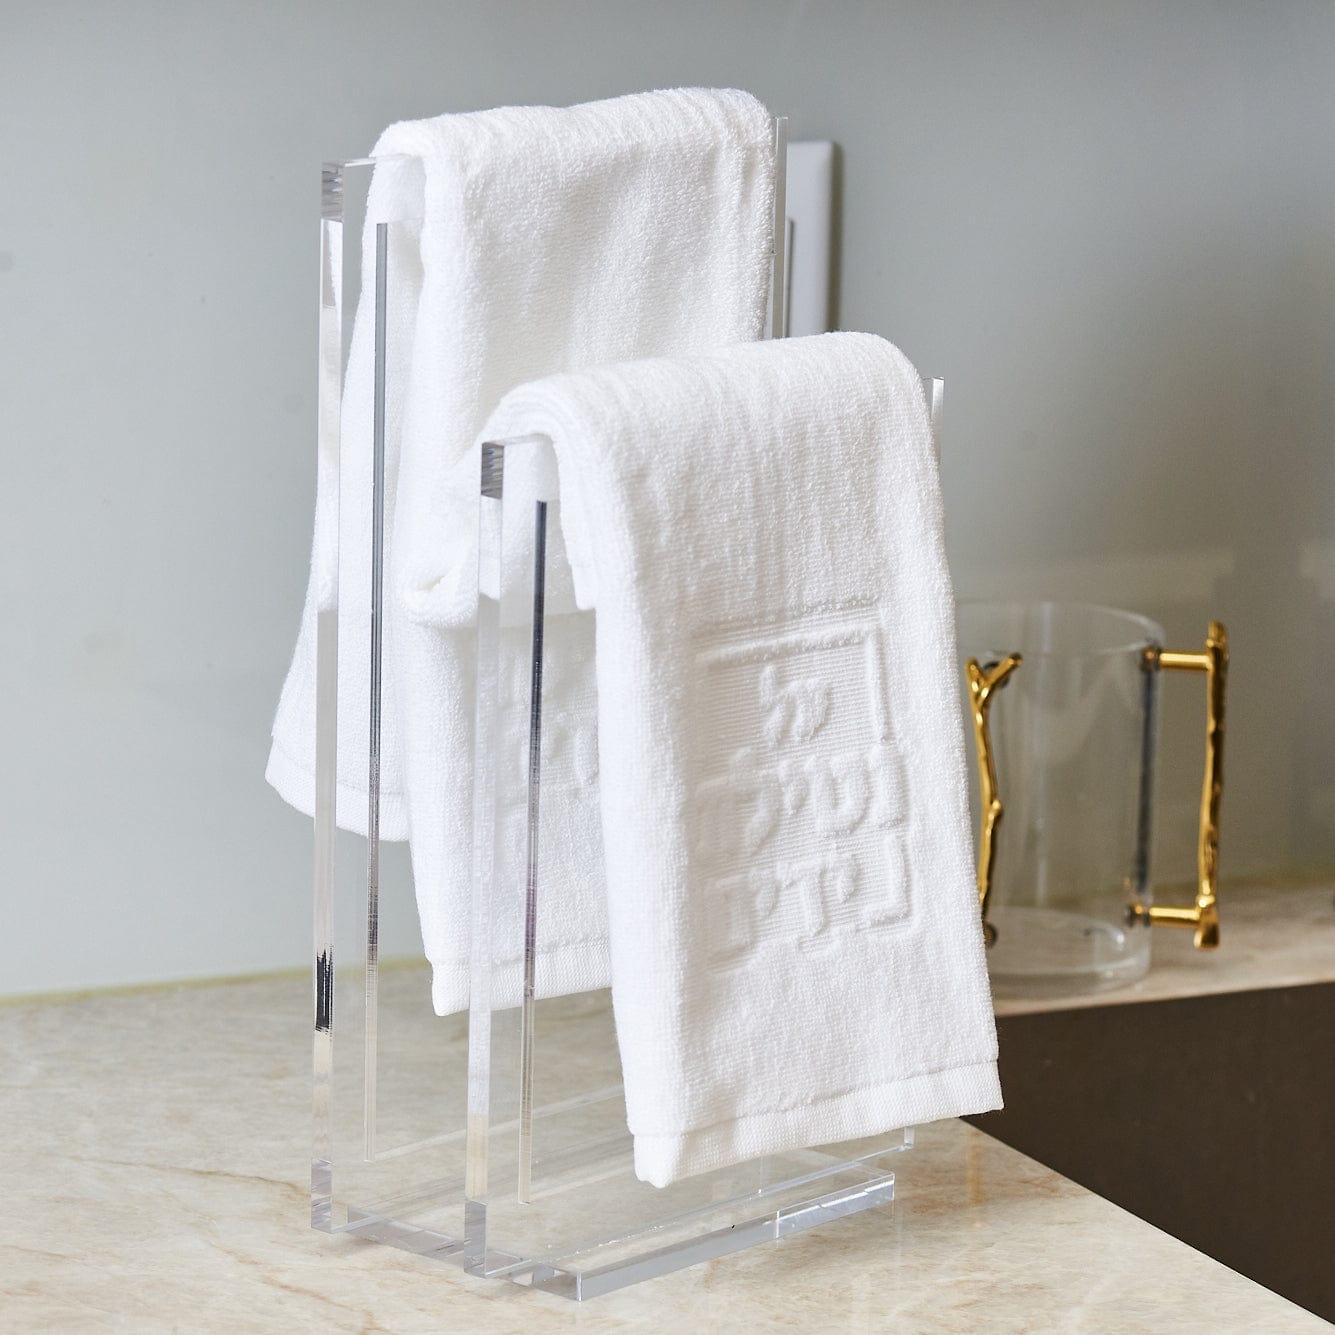 Netilas Yadayim Embossed Finger Towel - Waterdale Collection